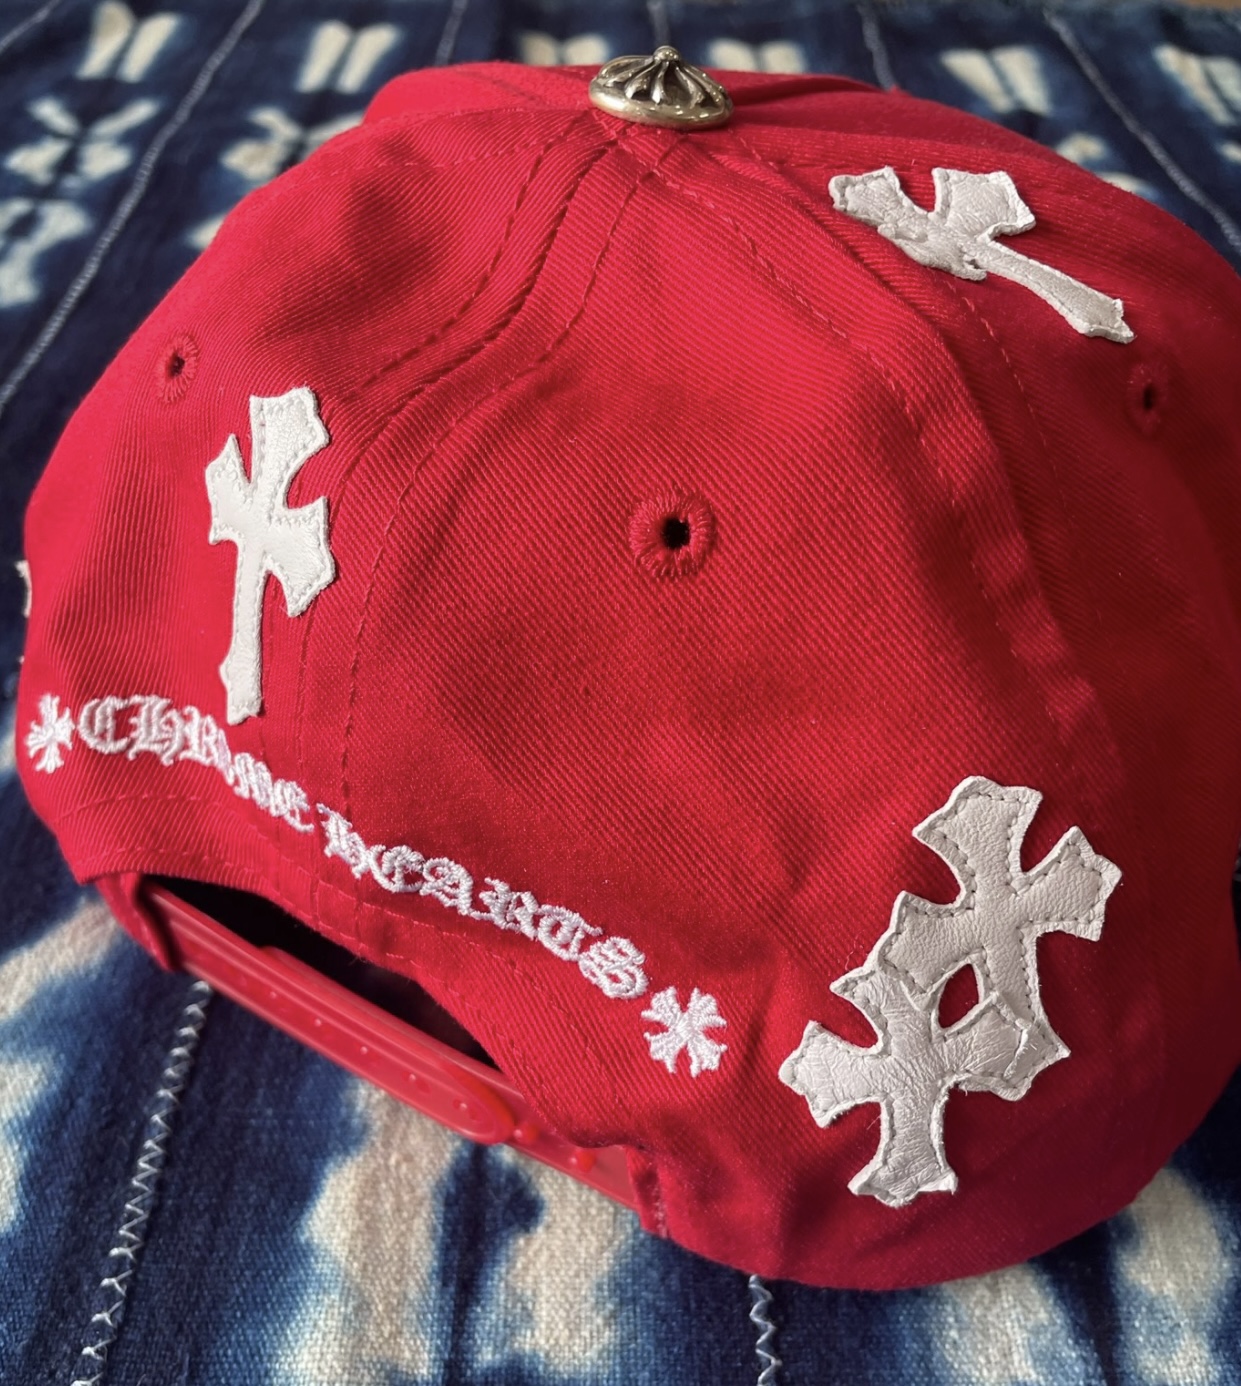 Chrome Hearts Red Cap with White Cross Patch - 3